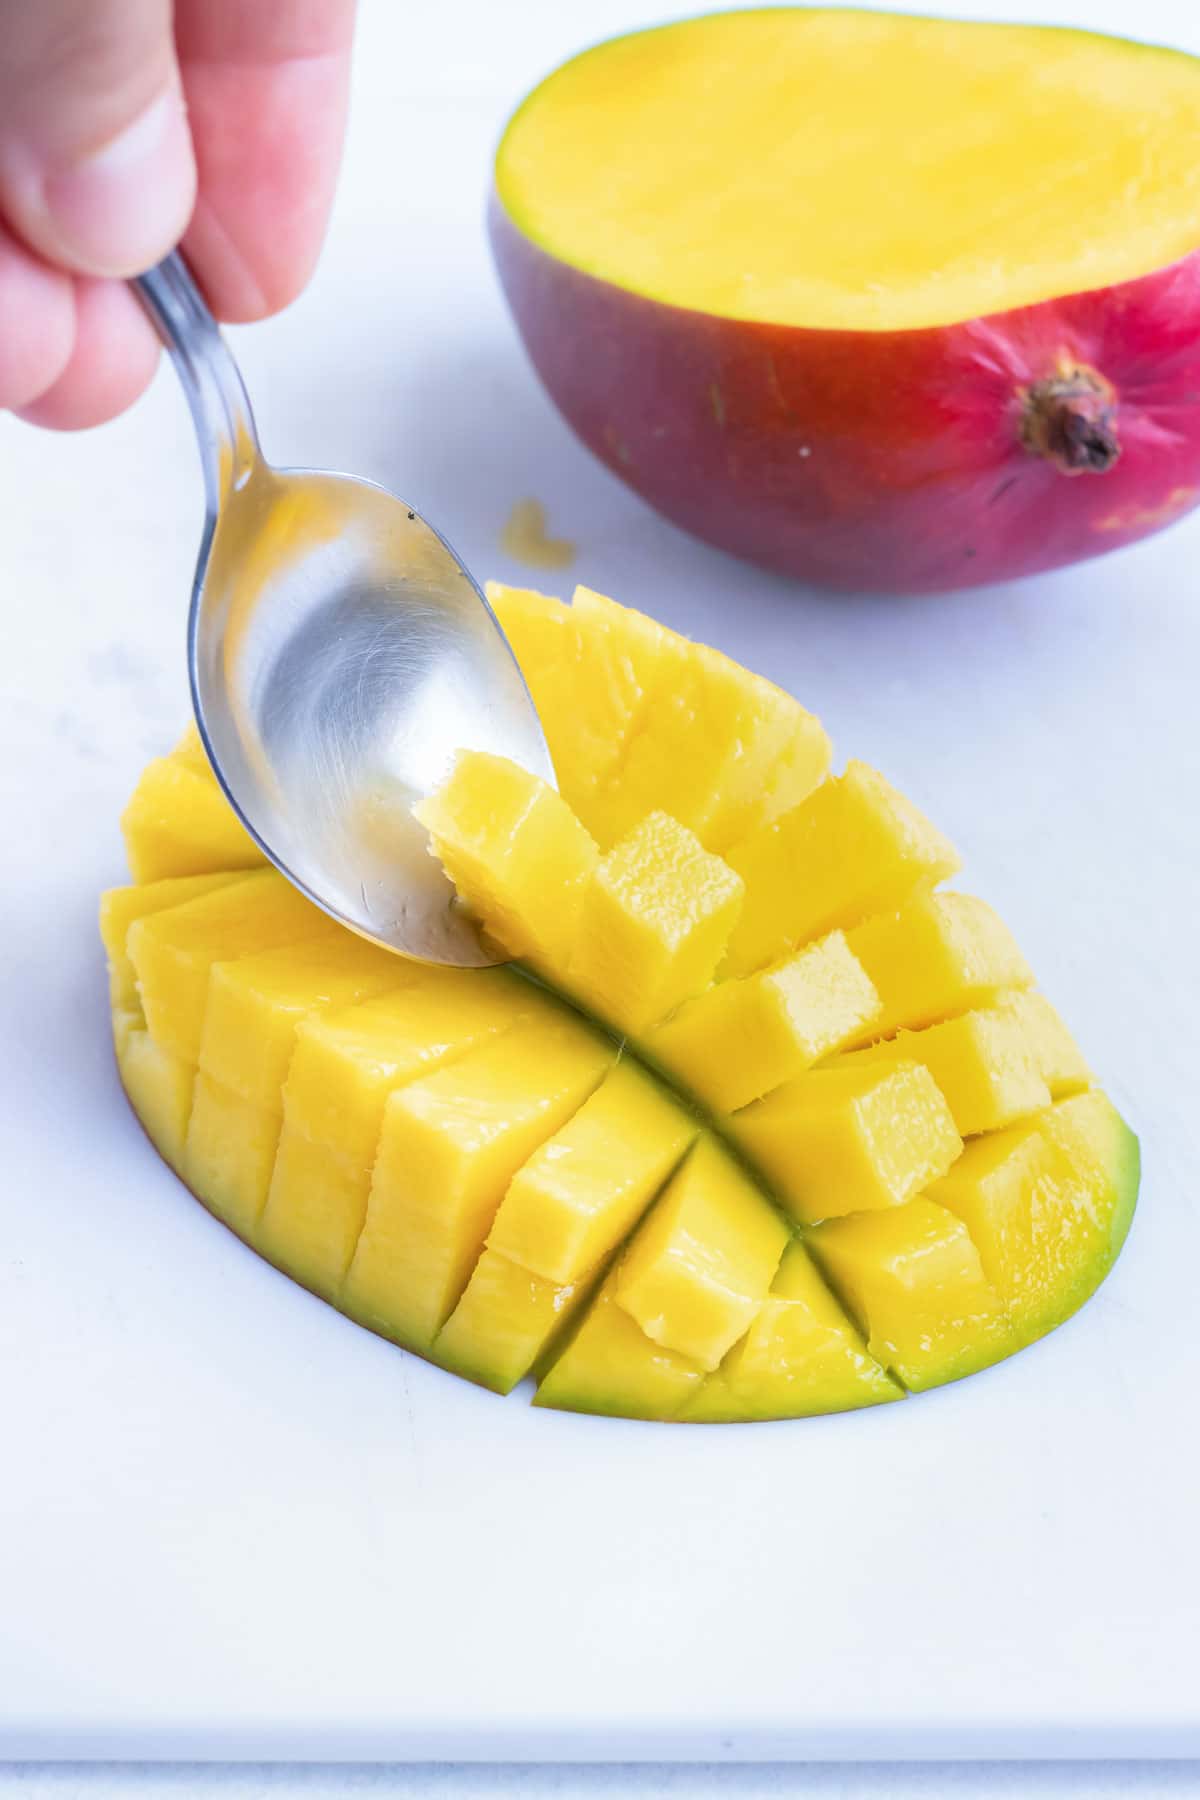 Scooping out cut mango with a spoon to remove the fruit.